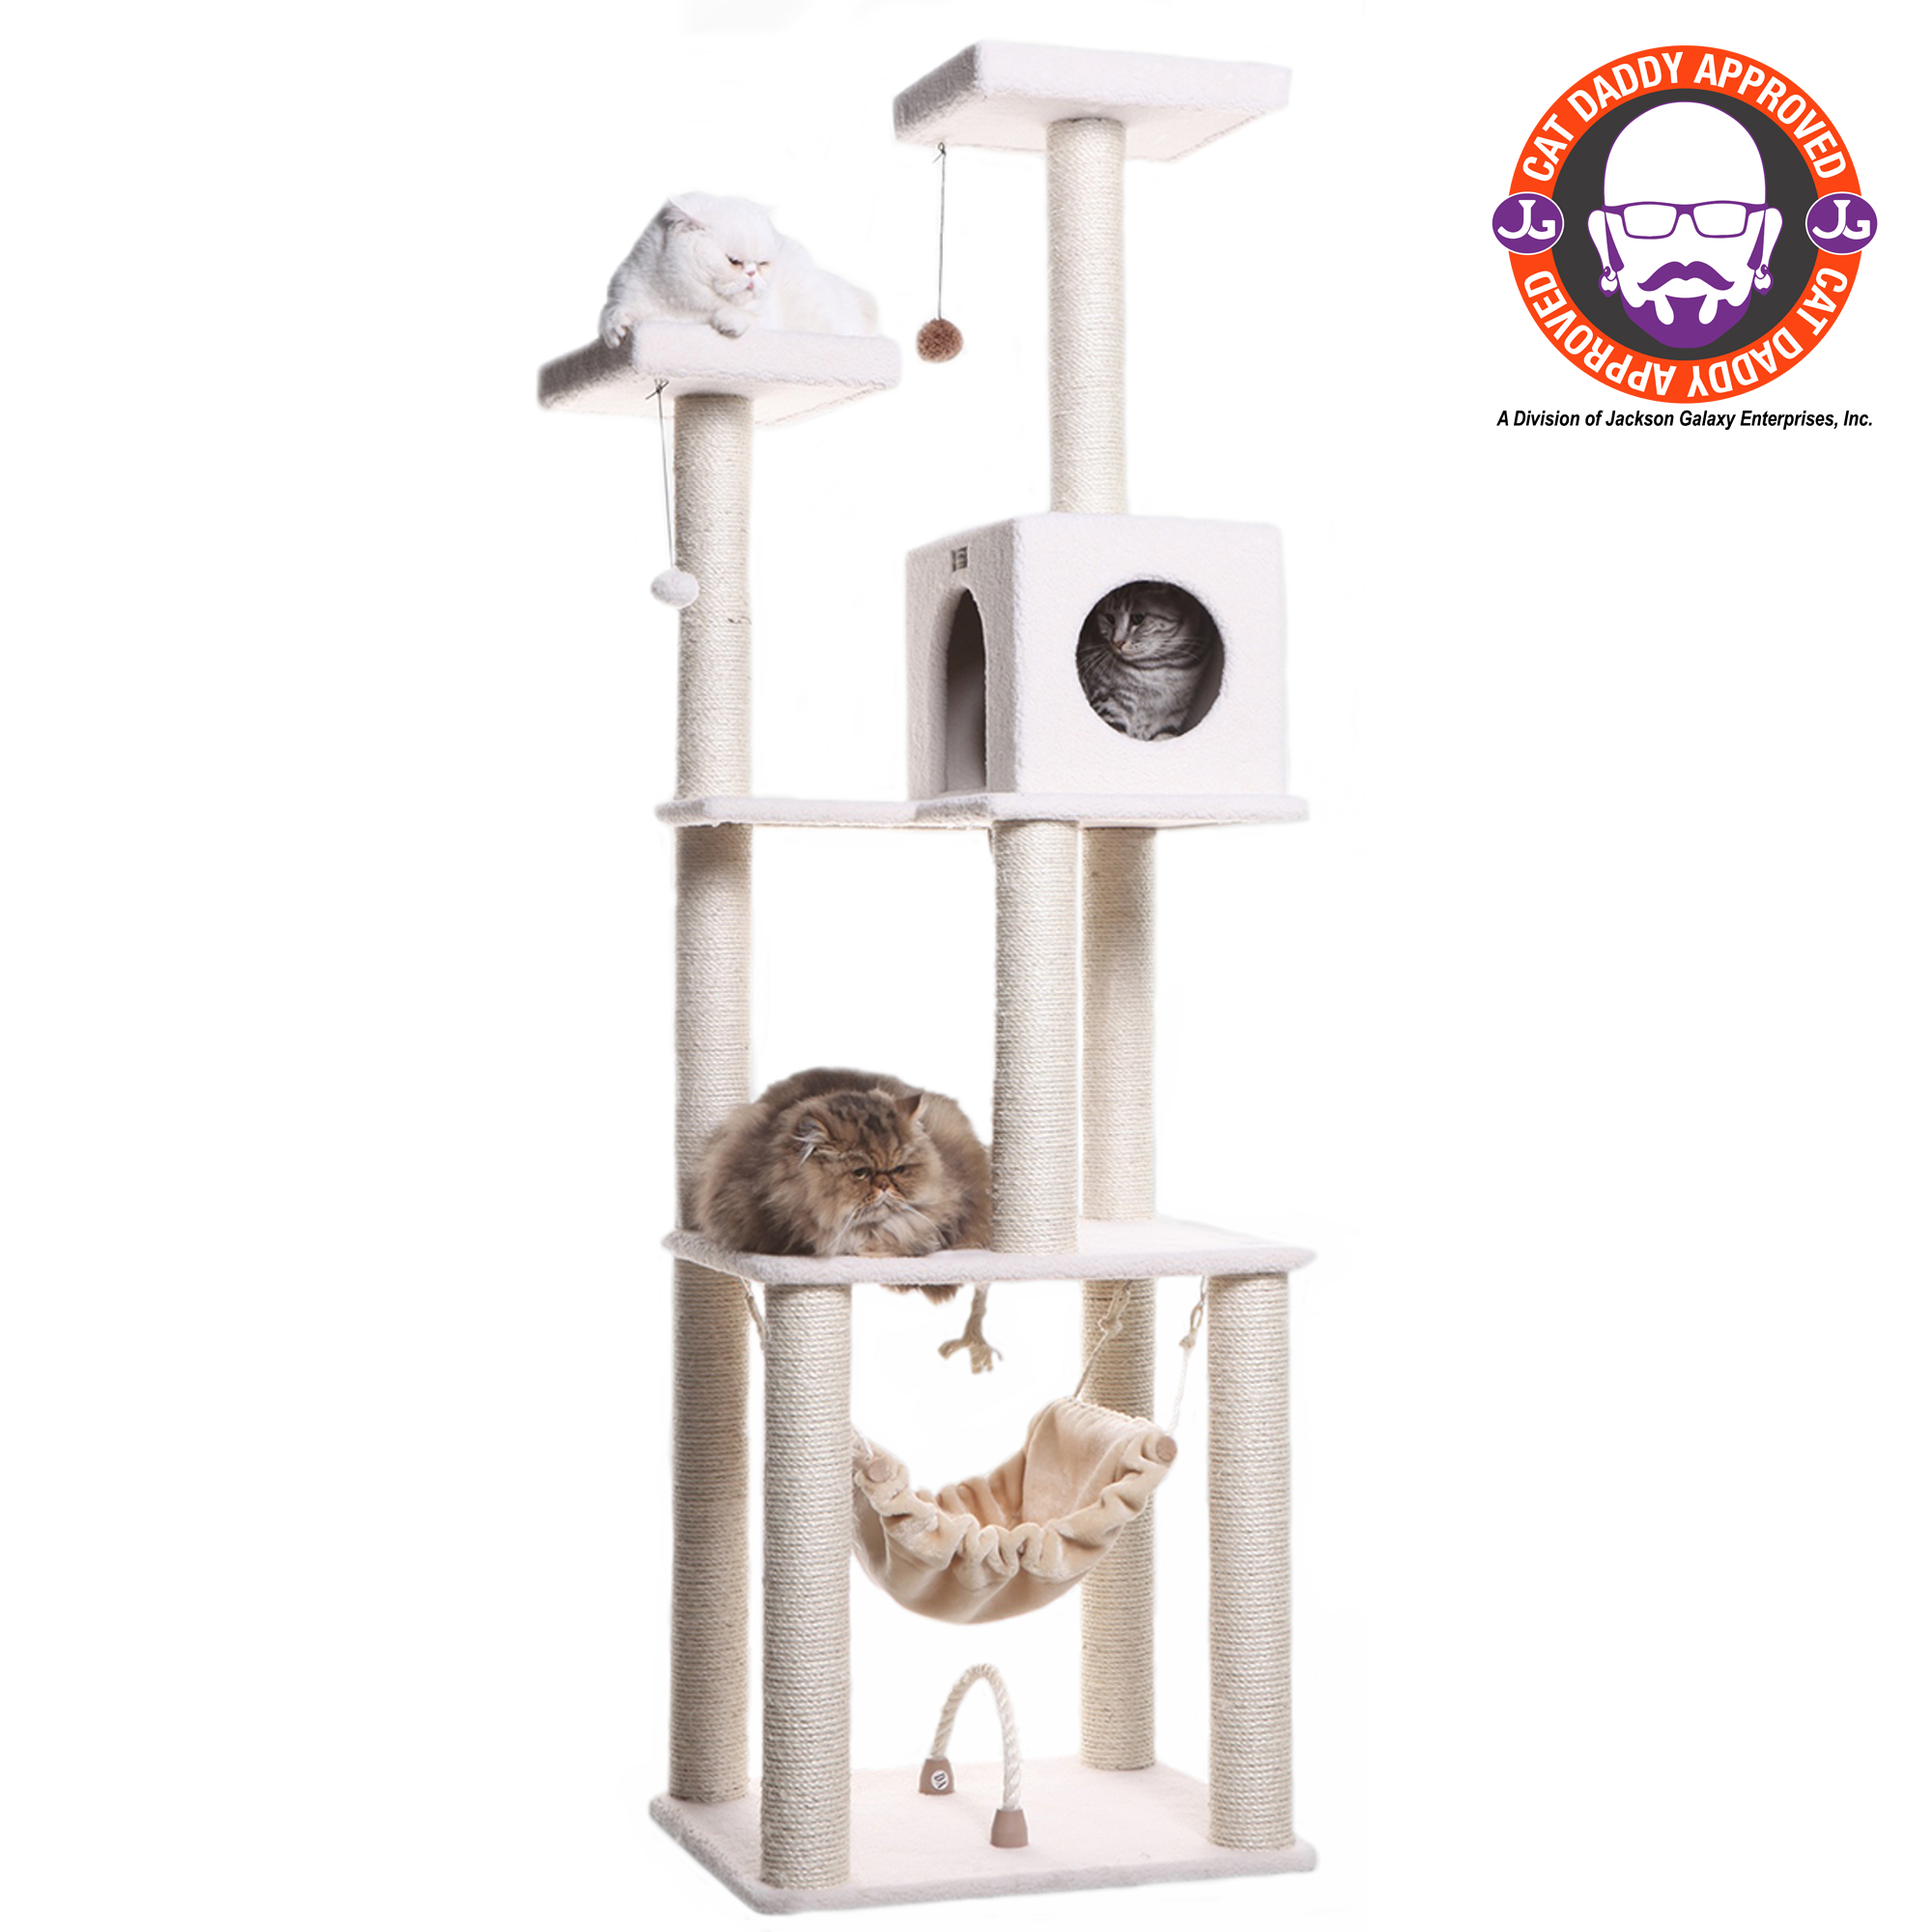 Aeromark Armarkat  Classic Real Wood Cat Tree In Ivory  Jackson Galaxy Approved  Four Levels With Rope SwIng  Hammock  Condo  and Perch